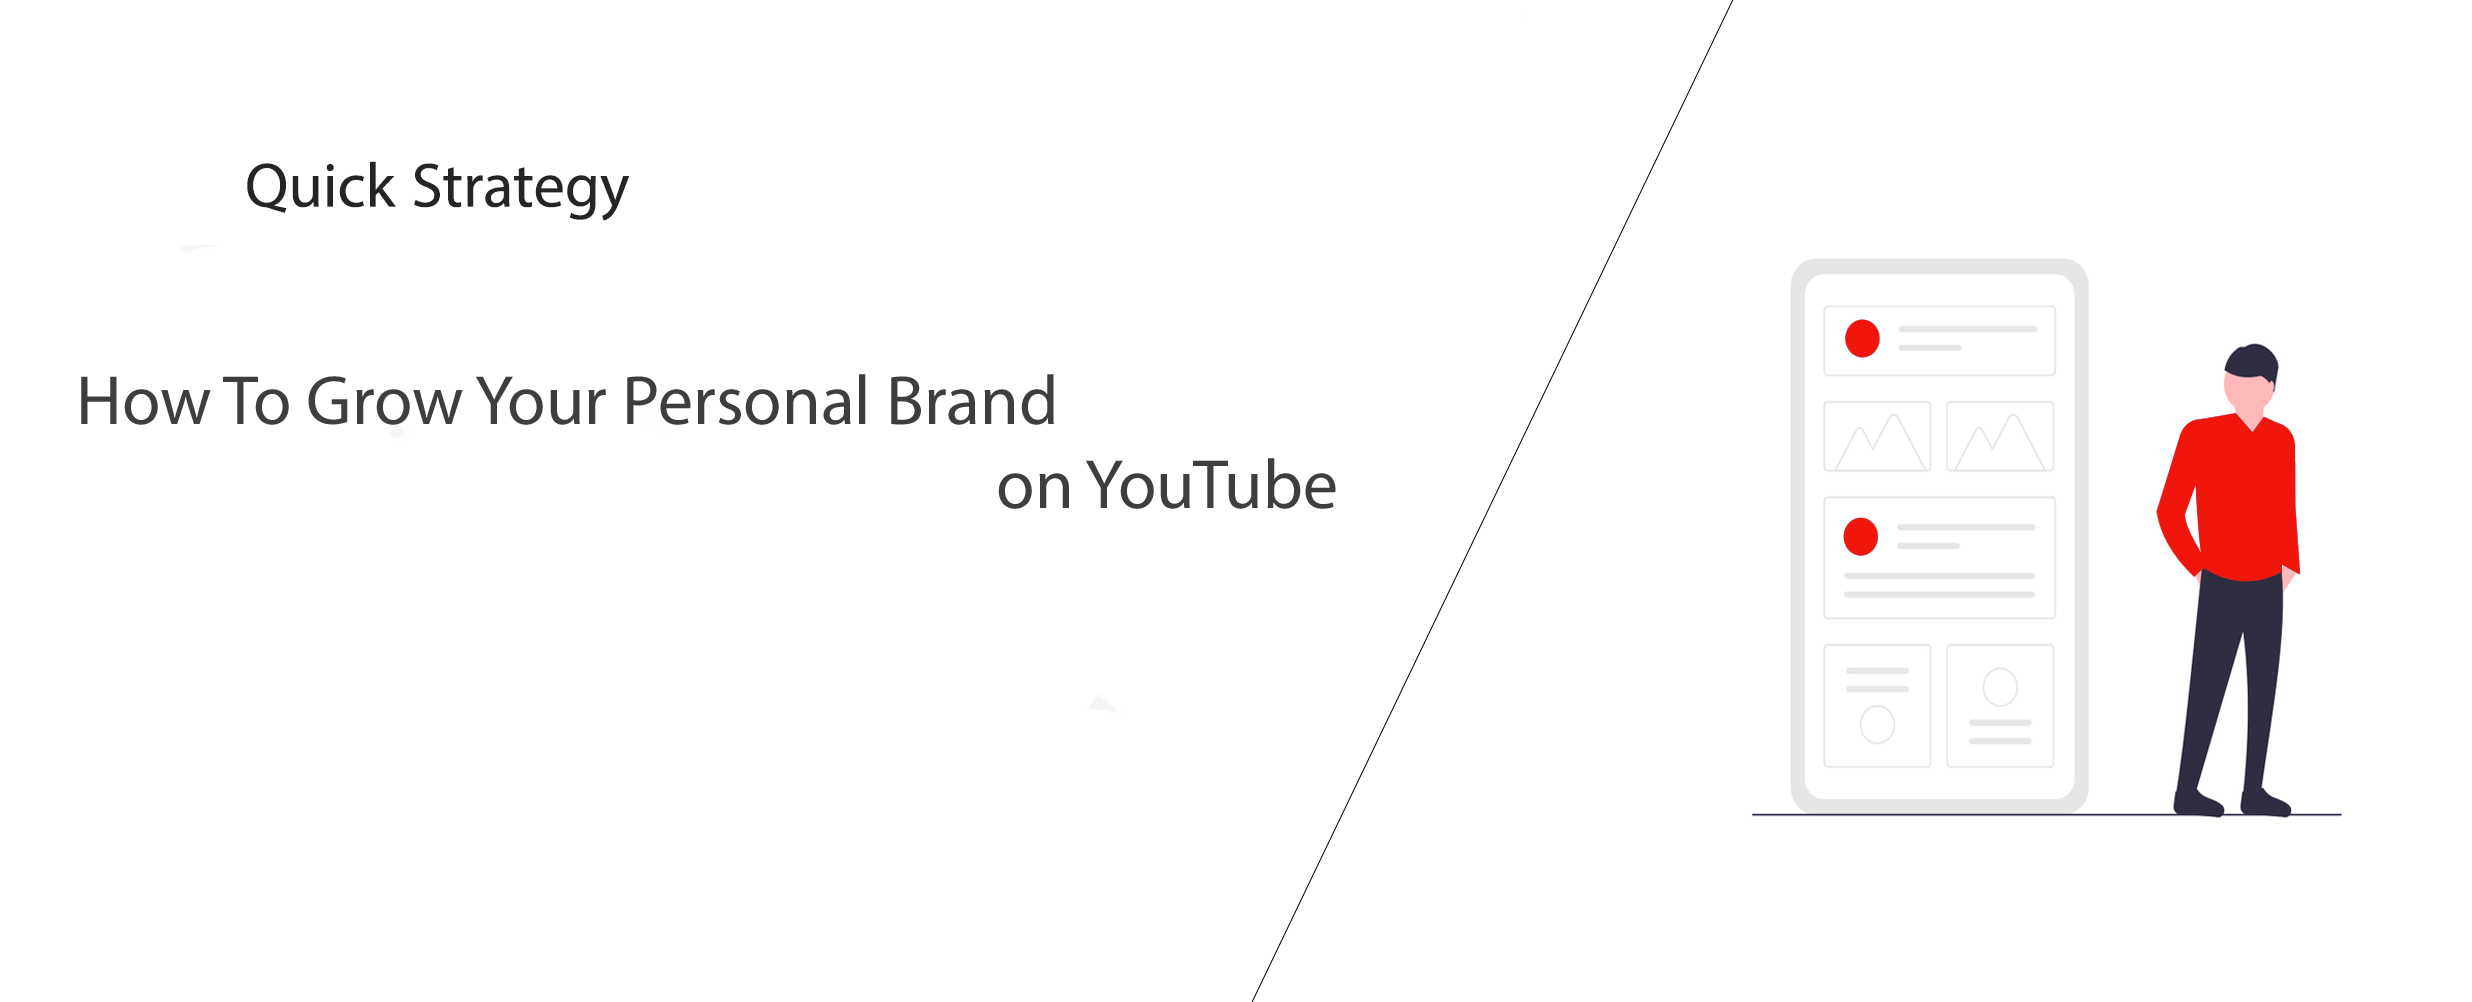 How To Grow Your Personal Brand on YouTube